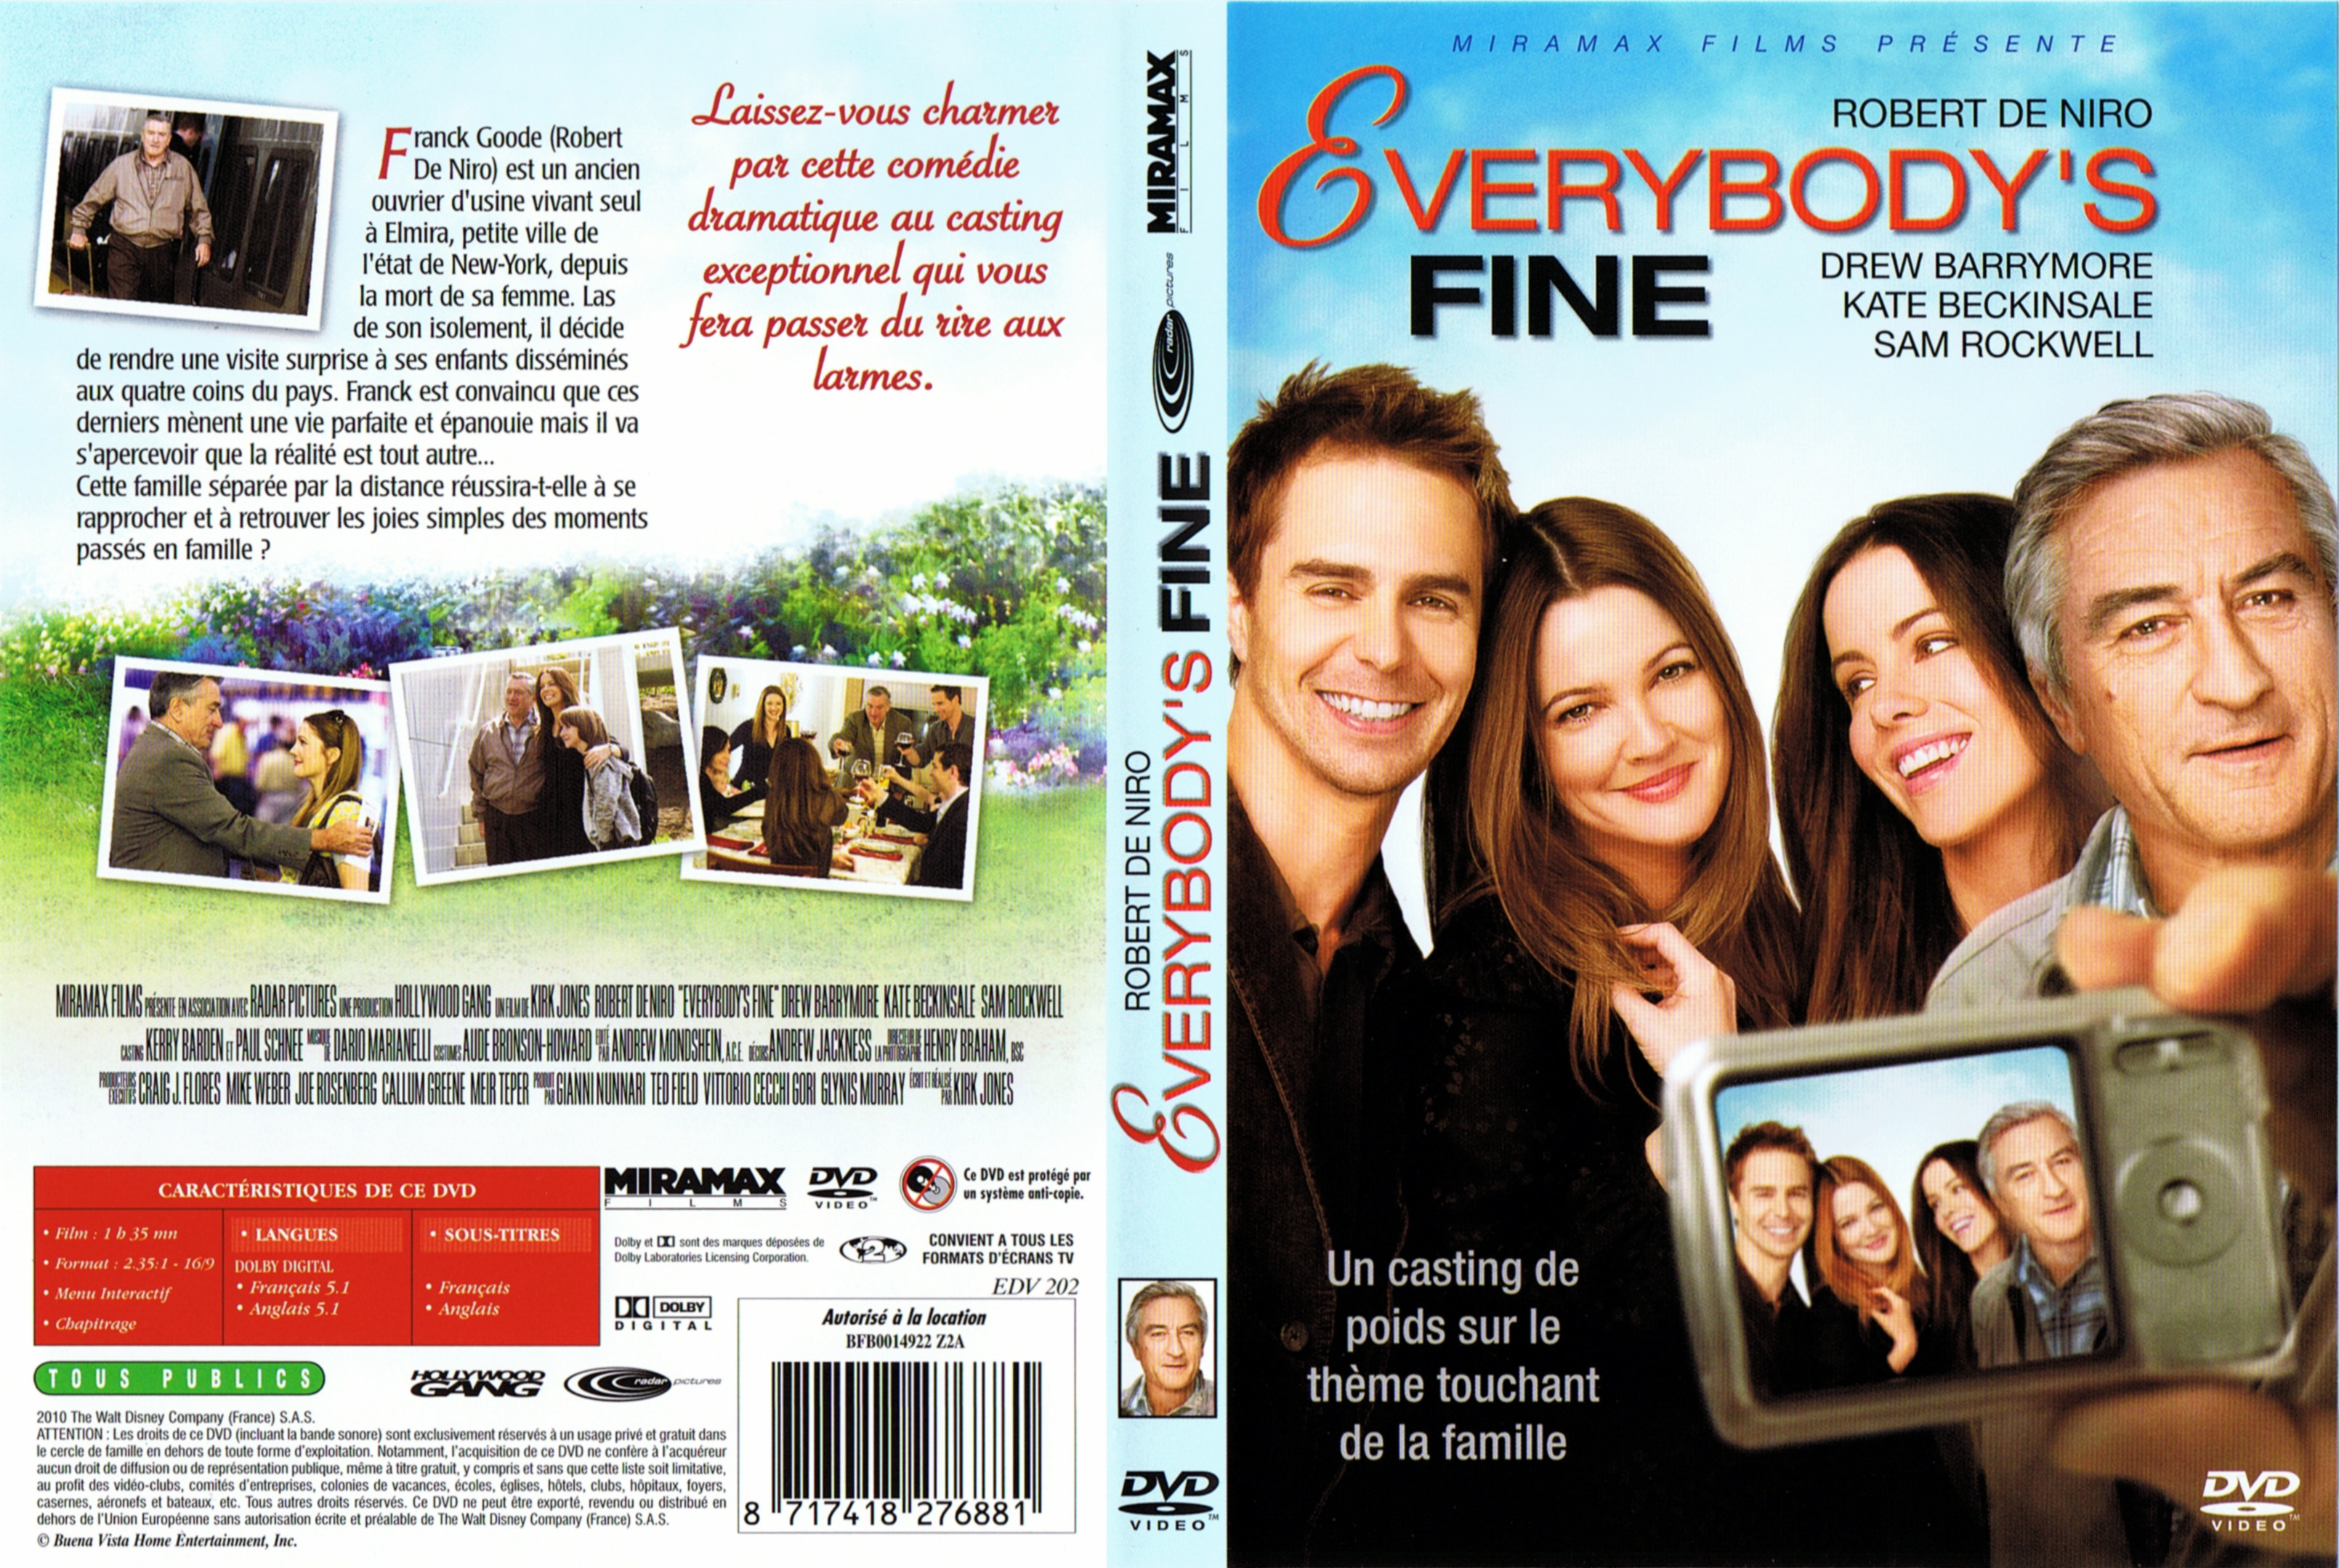 Jaquette DVD Everybody